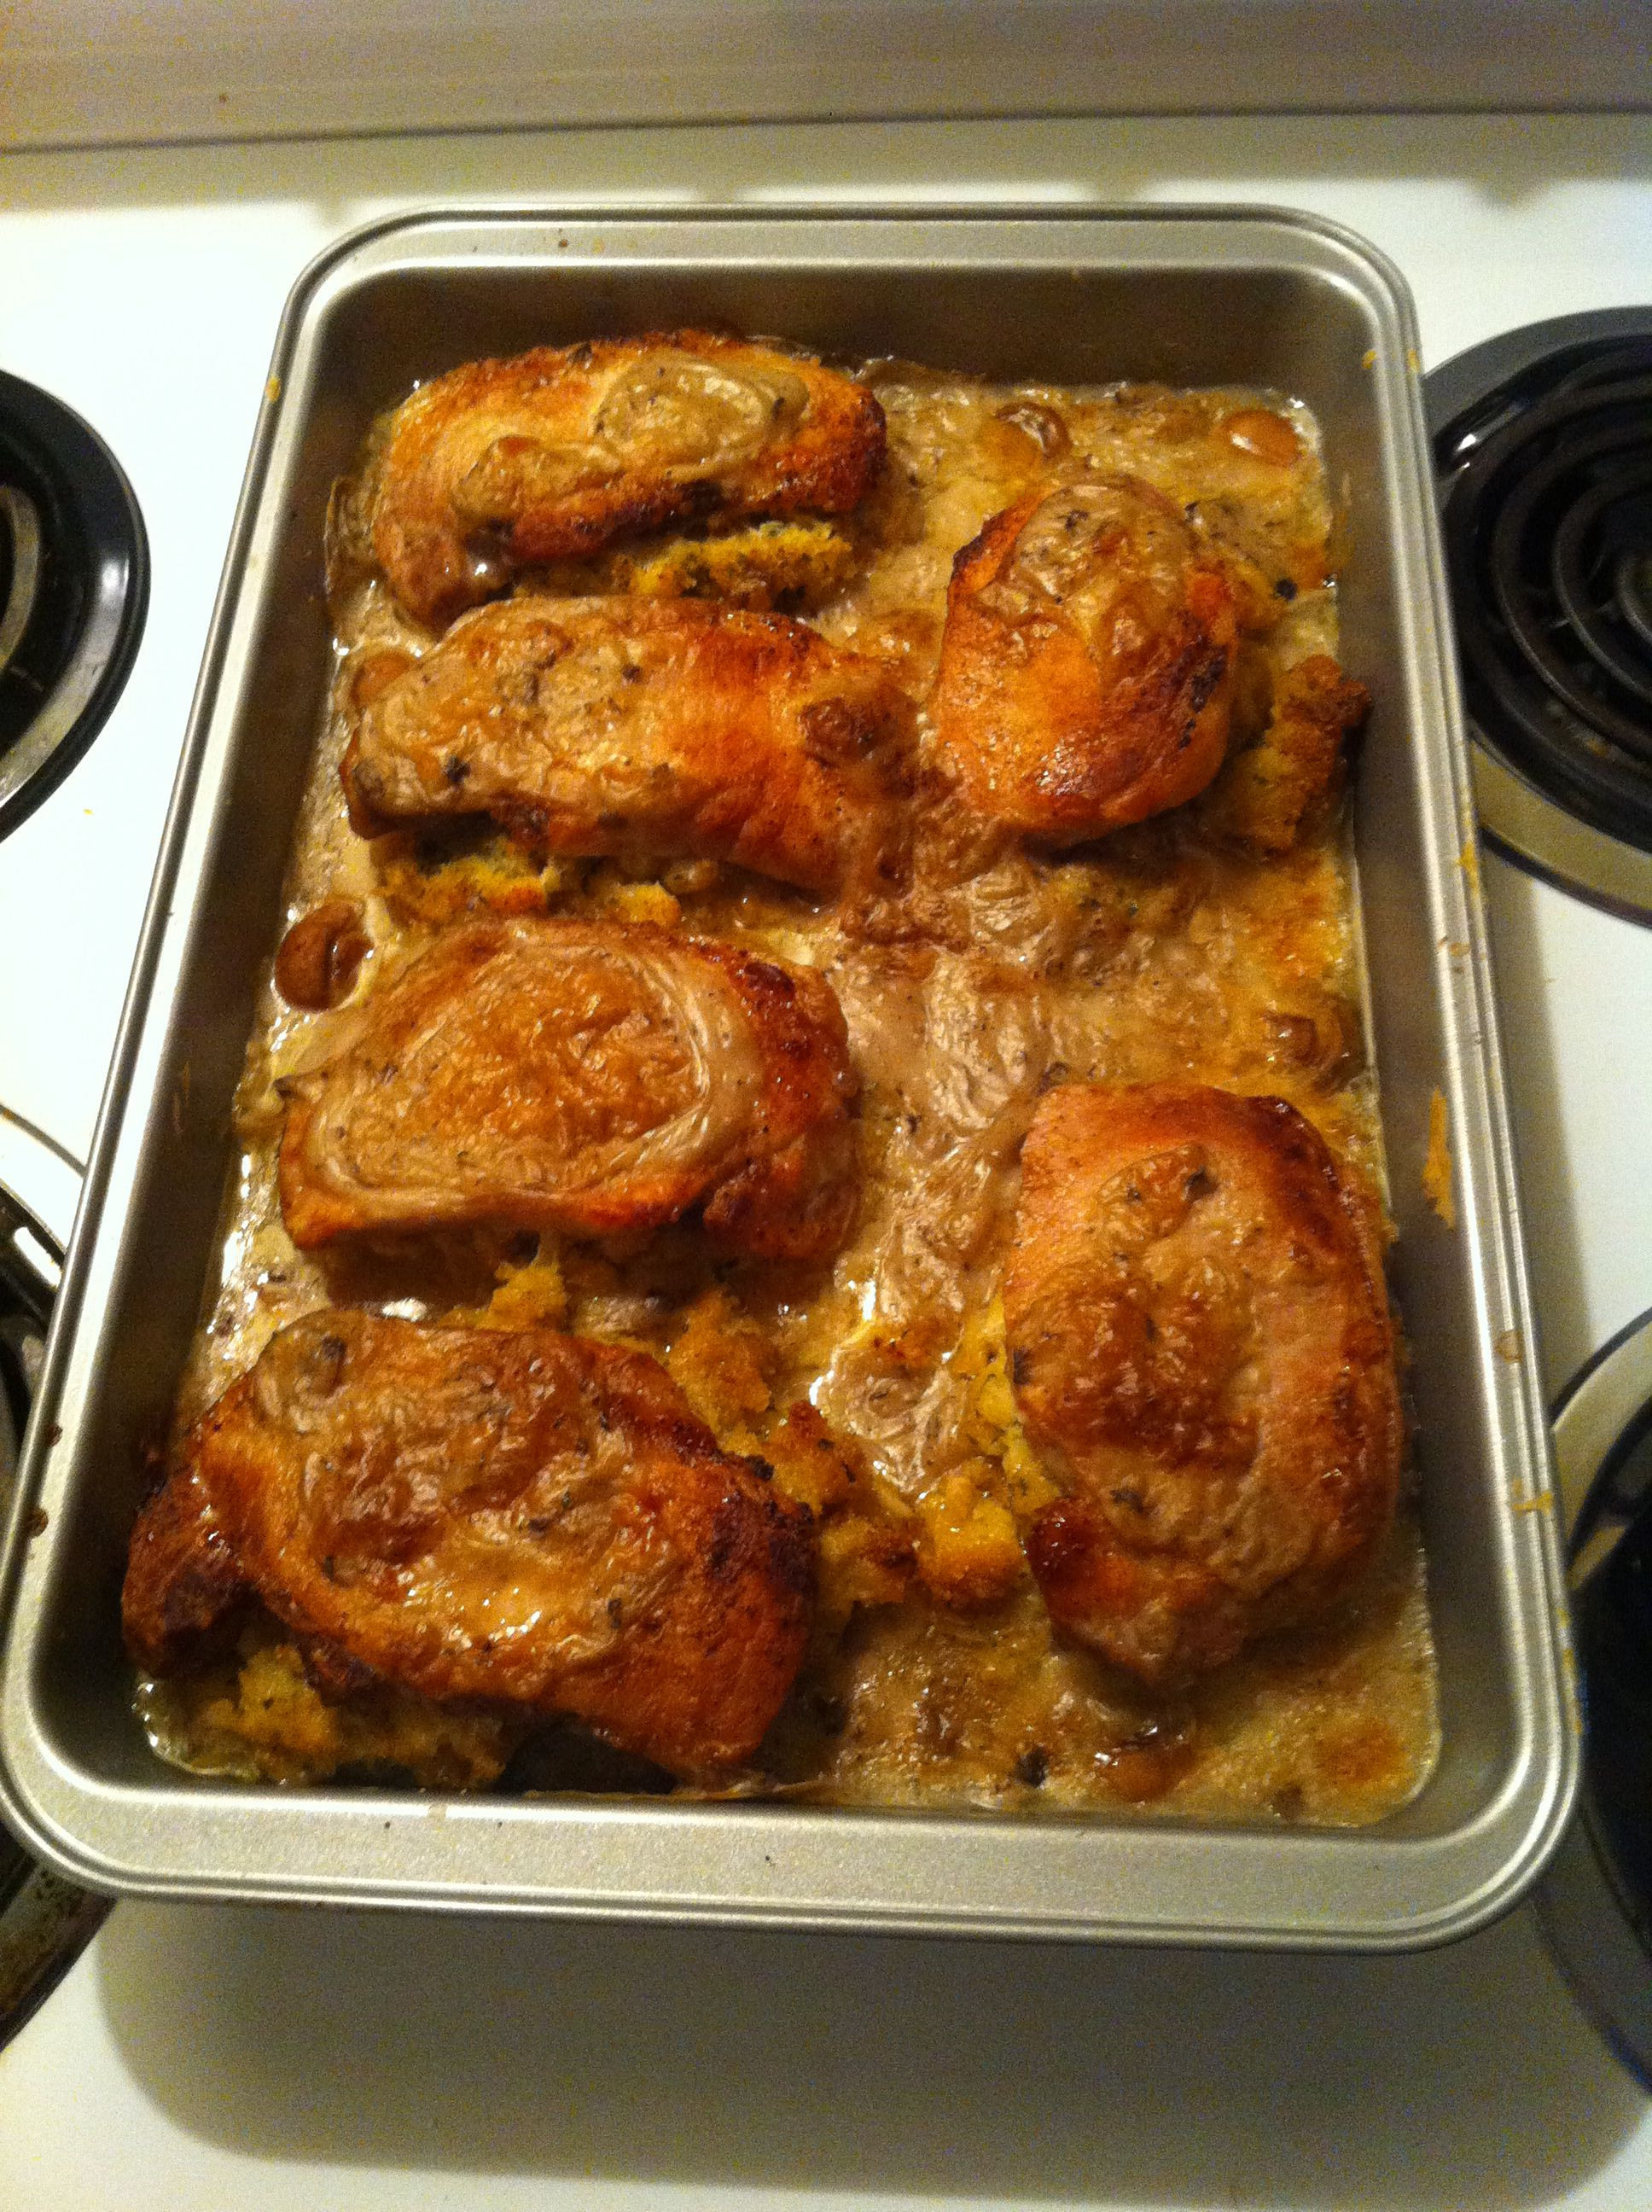 Stove Top Stuffed Pork Chops
 Stuffed pork chops with can of cream of mushroom and whole